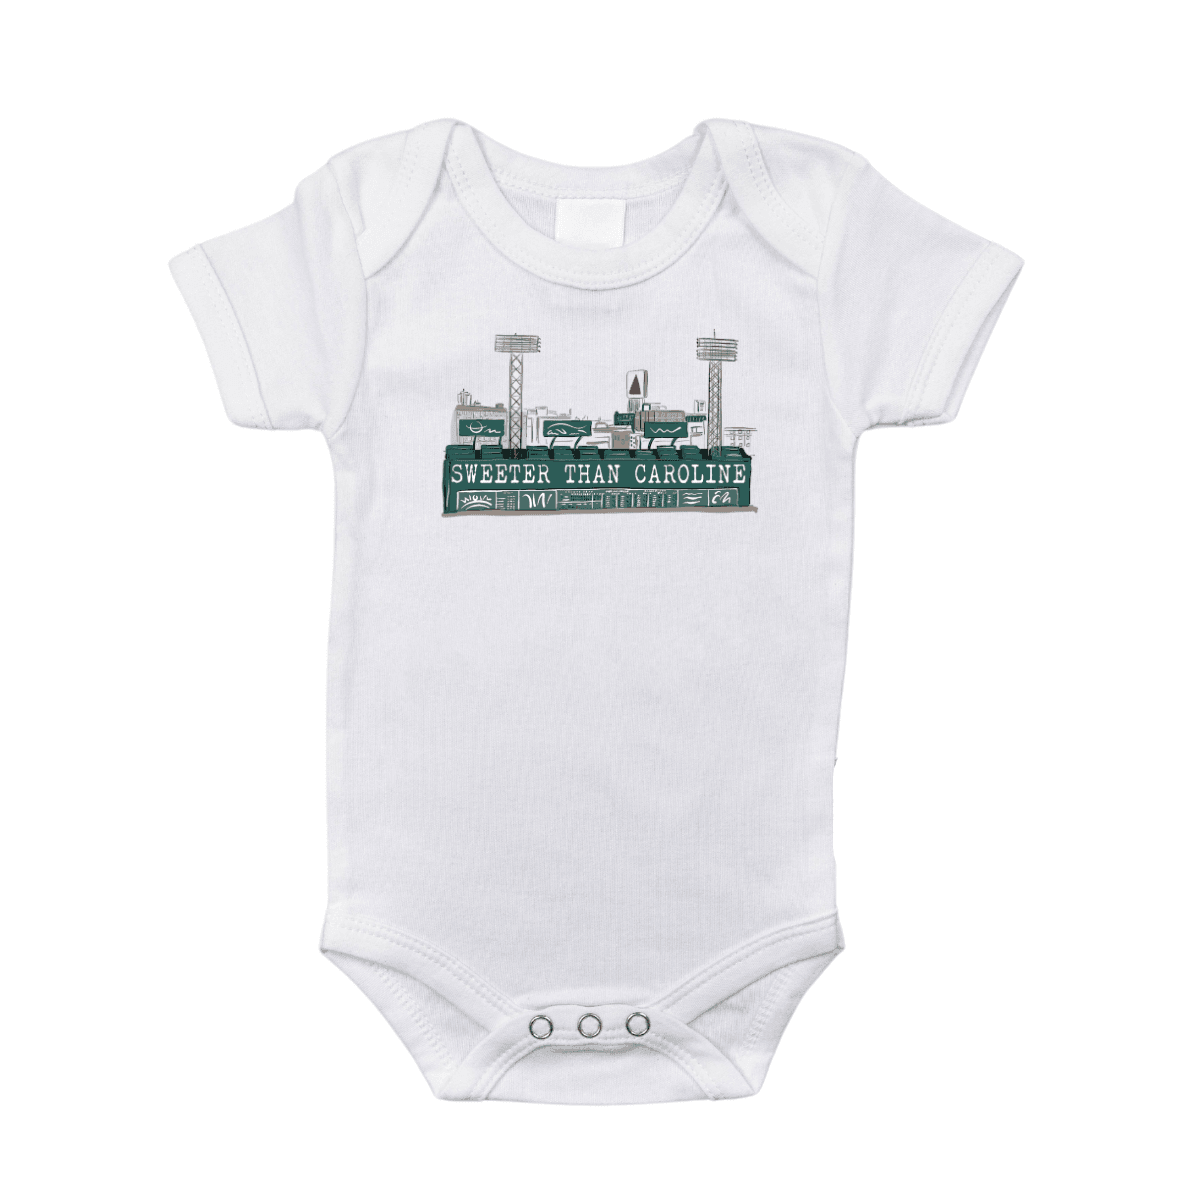 White baby onesie with "Massachusetts Sweeter Than Caroline" text and a red heart, on a plain background.